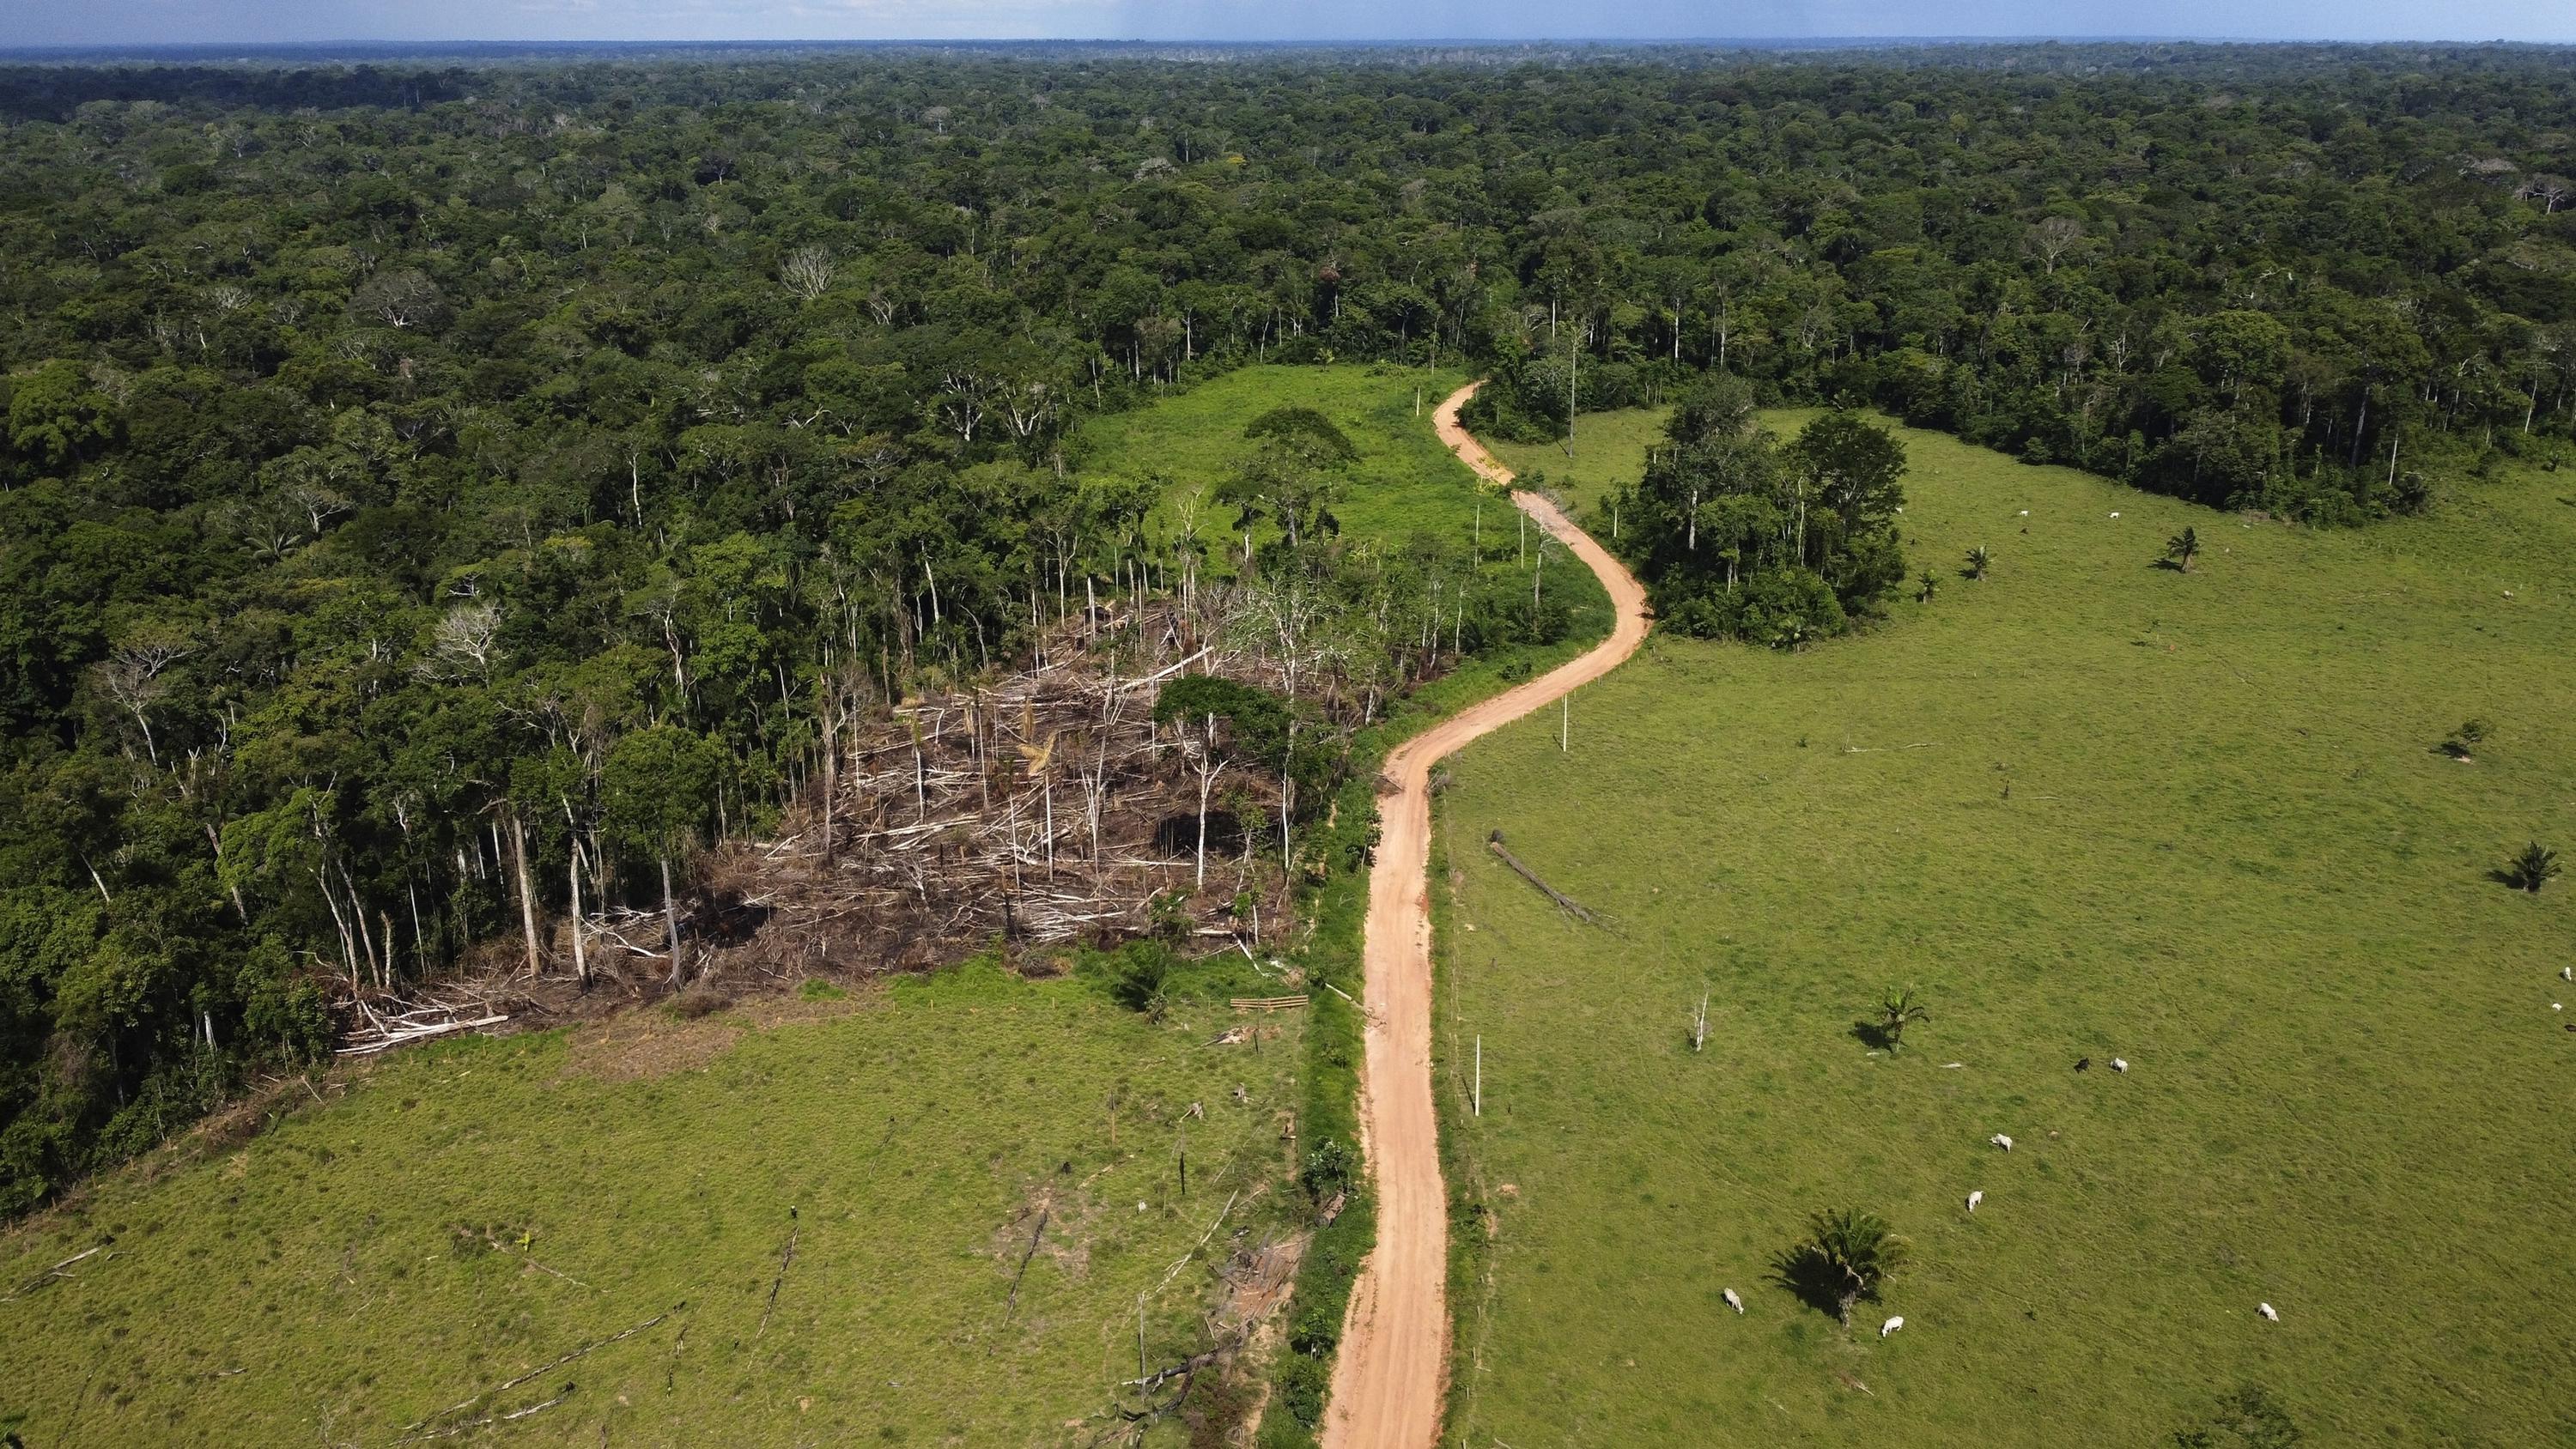 In Brazil's , carbon credit project halted over land dispute